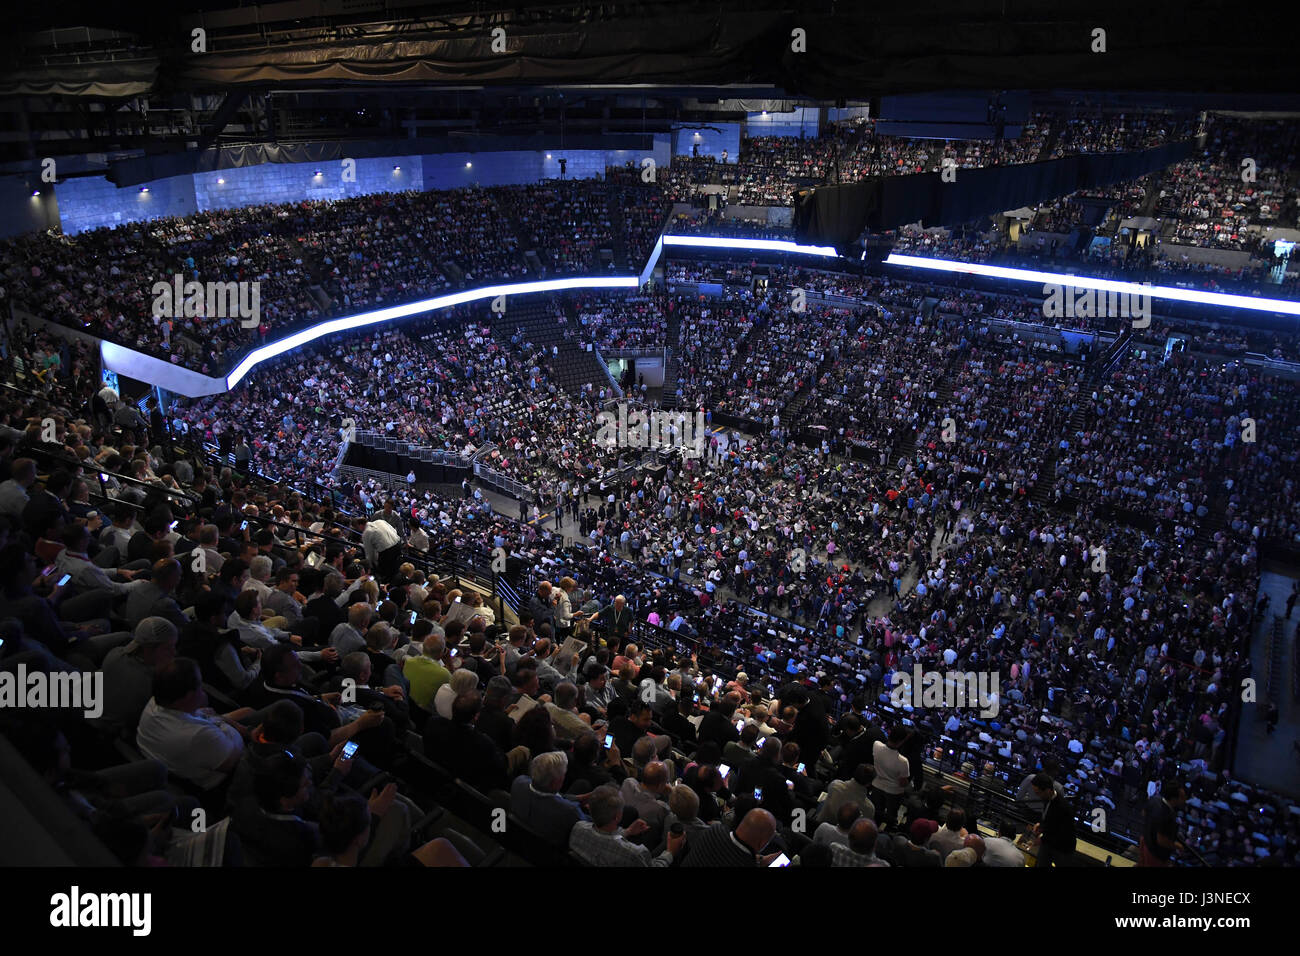 Omaha, USA. 6th May, 2017. Shareholders attend Warren Buffett's Berkshire Hathaway Annual Meeting in Omaha, Nebraska, the United States, May 6, 2017. The event attracts more than 40,000 shareholders from around the world as well as a wide variety of media outlets to Omaha every year. Credit: Yin Bogu/Xinhua/Alamy Live News Stock Photo